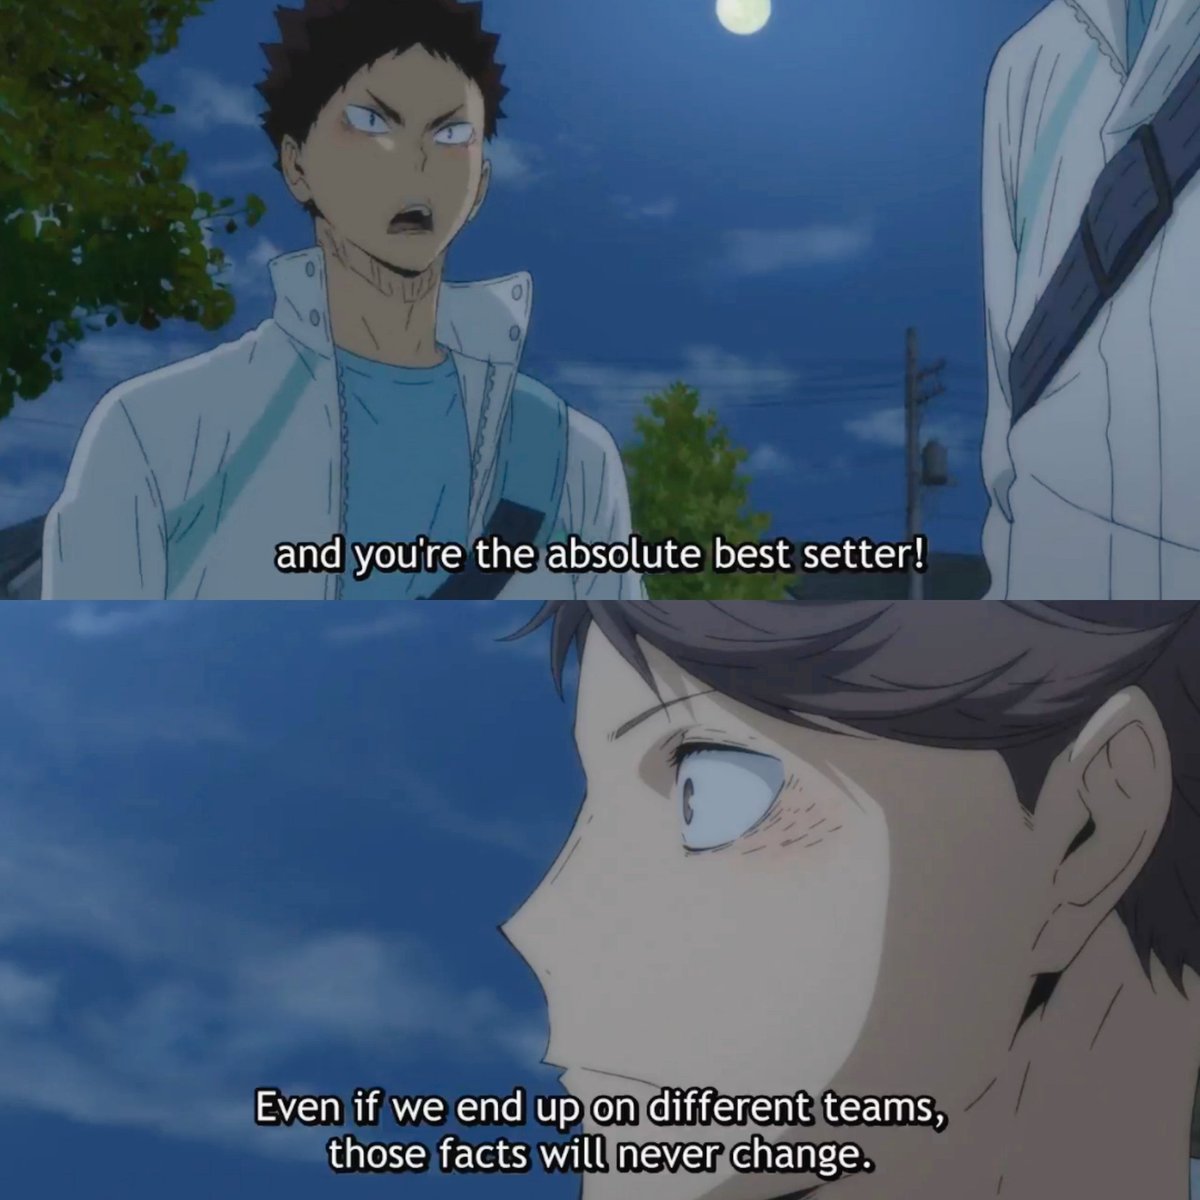 DID U SEE WHAT THEY SAID? HOW THEY ARGUED OVER WHO TO BE MAD AT BECAUSE IWA GOT BLOCKED AND OIKS MISSED THE RECEIVE? HOW IWA IS SO PROUD TO HAVE OIKS AS A PARTNER, AND BELIEVES THAT HE'S THE BEST SETTER EVER, AND HOW THAT WON'T CHANGE EVEN IF THEY END UP ON DIFFERENT TEAMS?